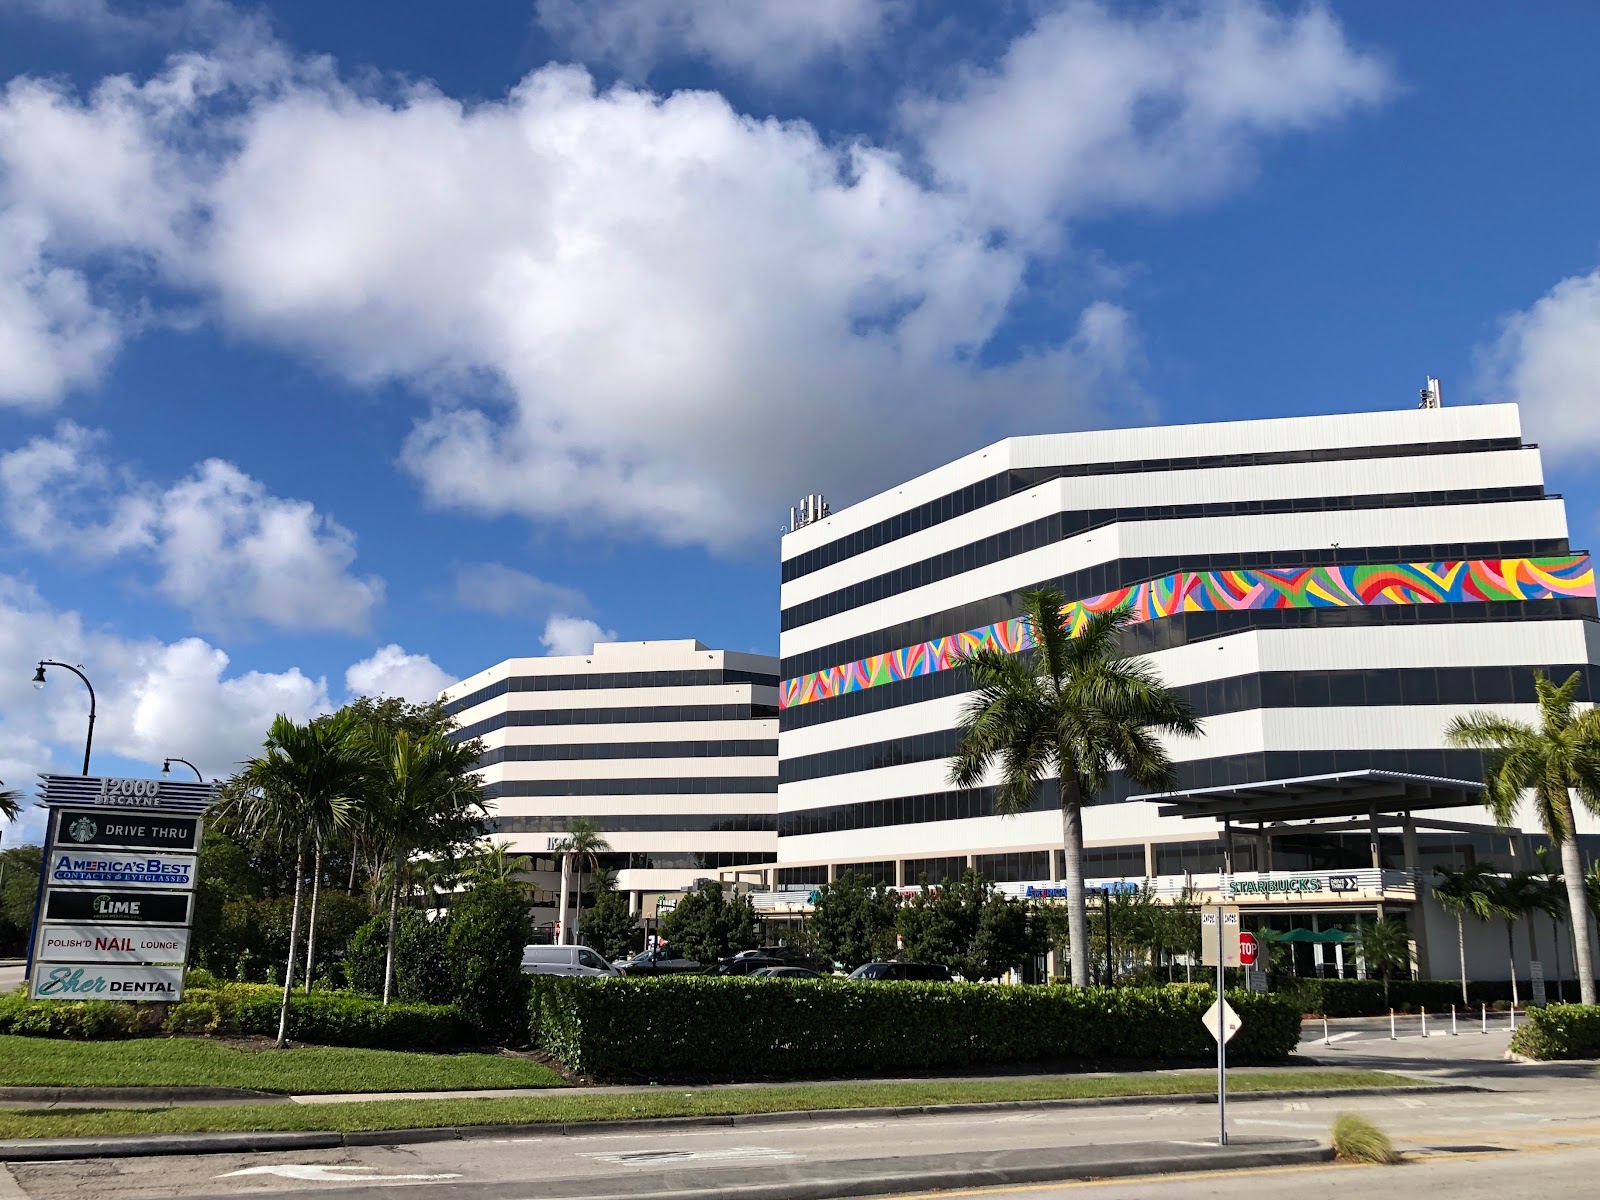 Jewish Community Services of South Florida 12000 Biscayne Boulevard